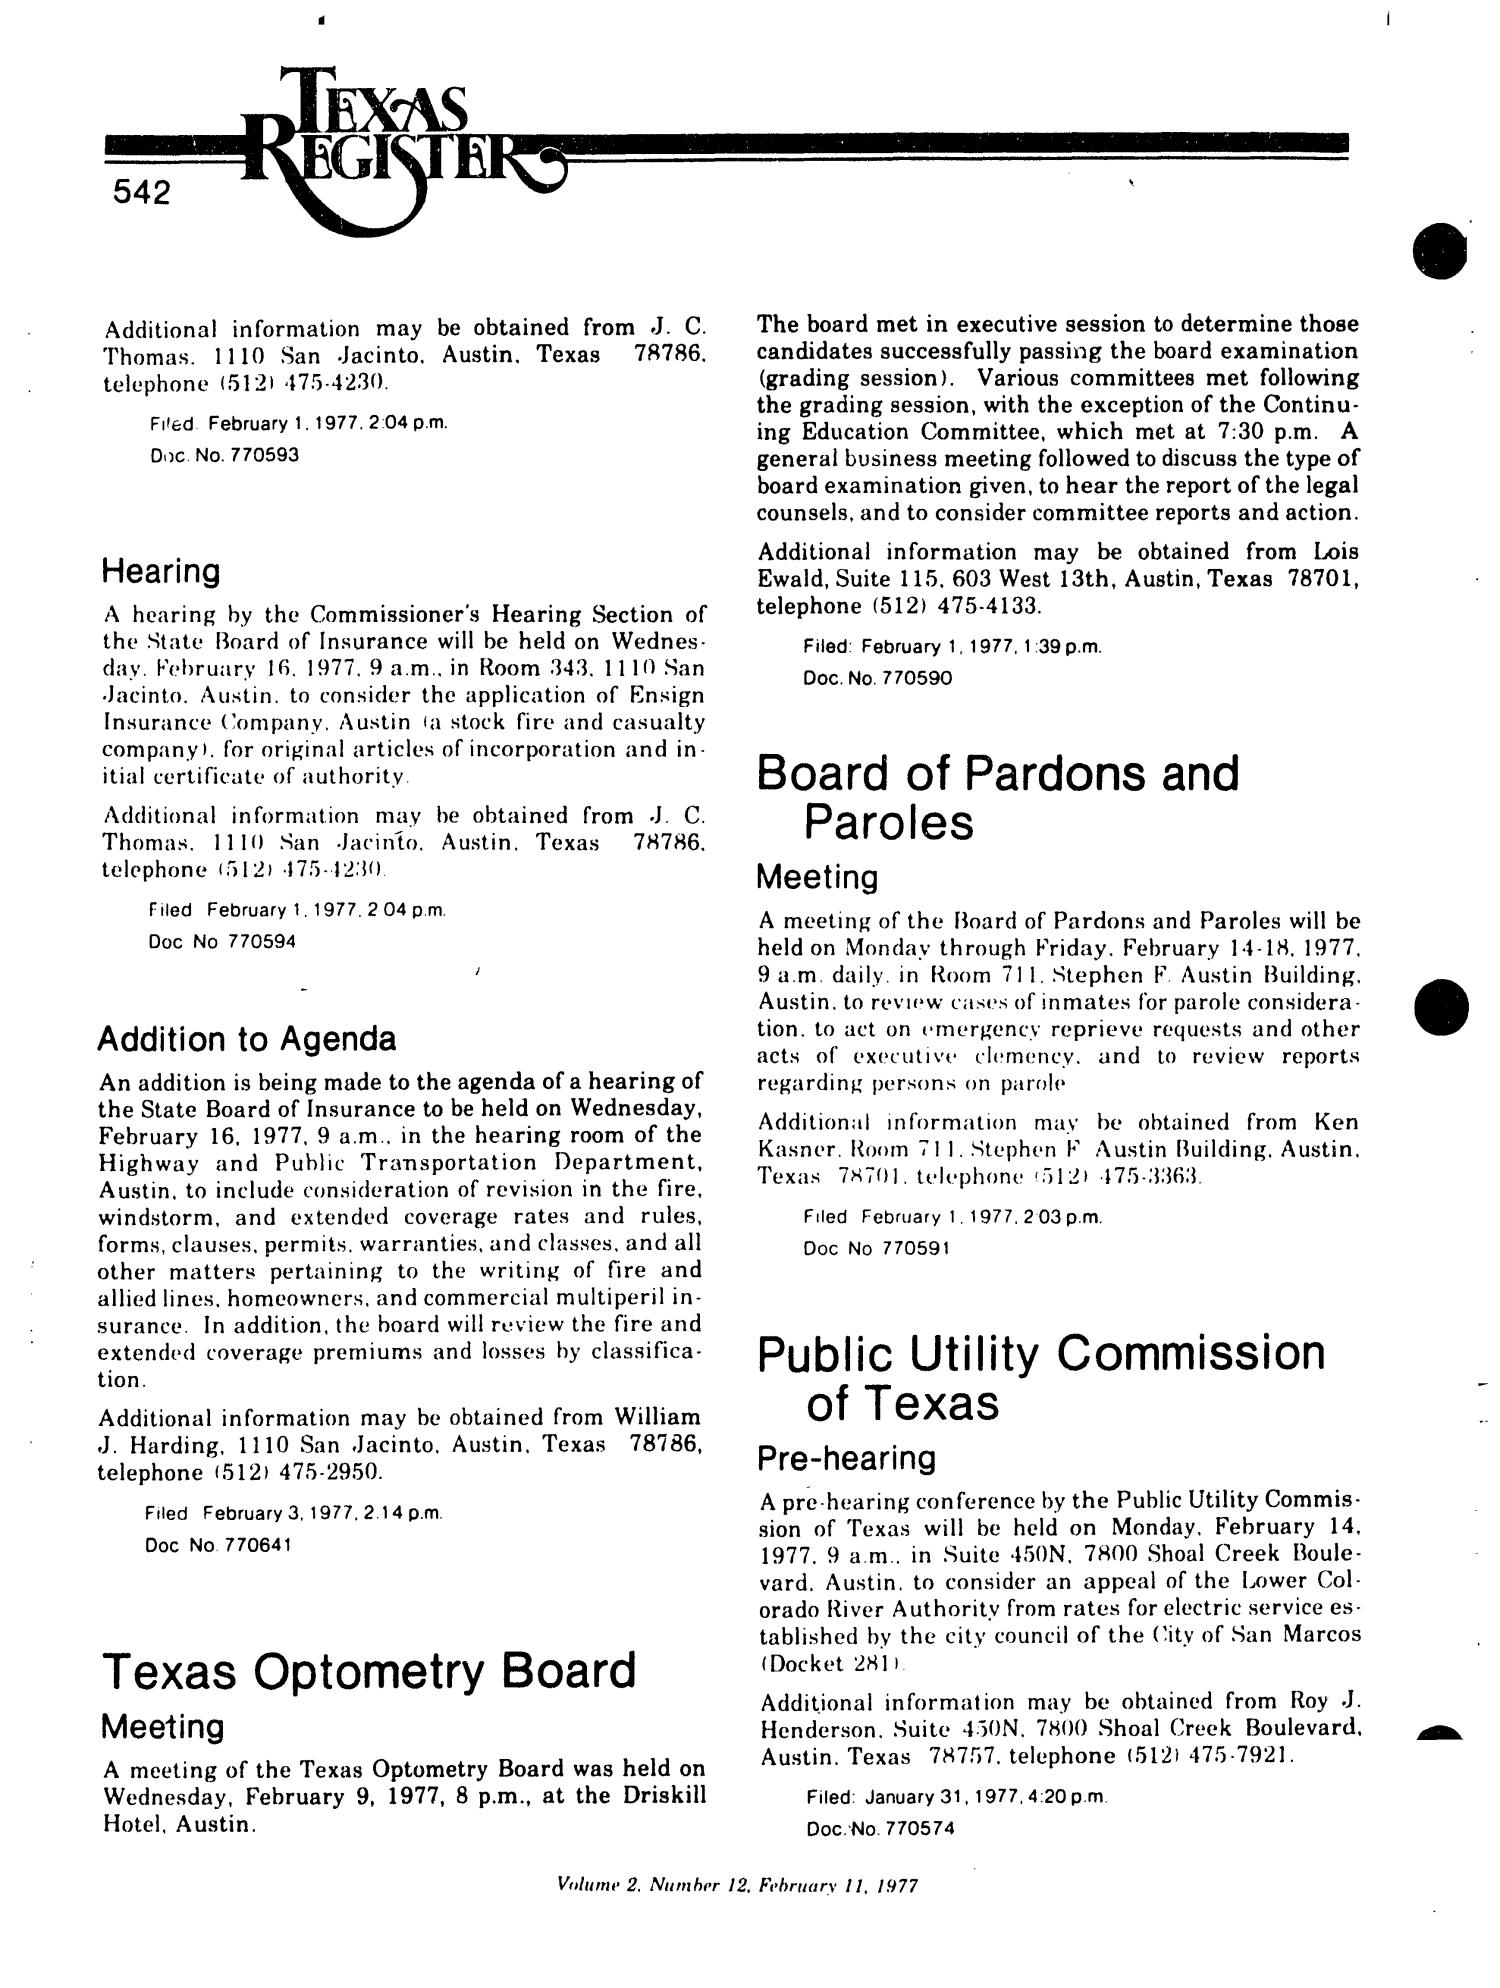 Texas Register, Volume 2, Number 12, Pages 507-562, February 11, 1977
                                                
                                                    542
                                                